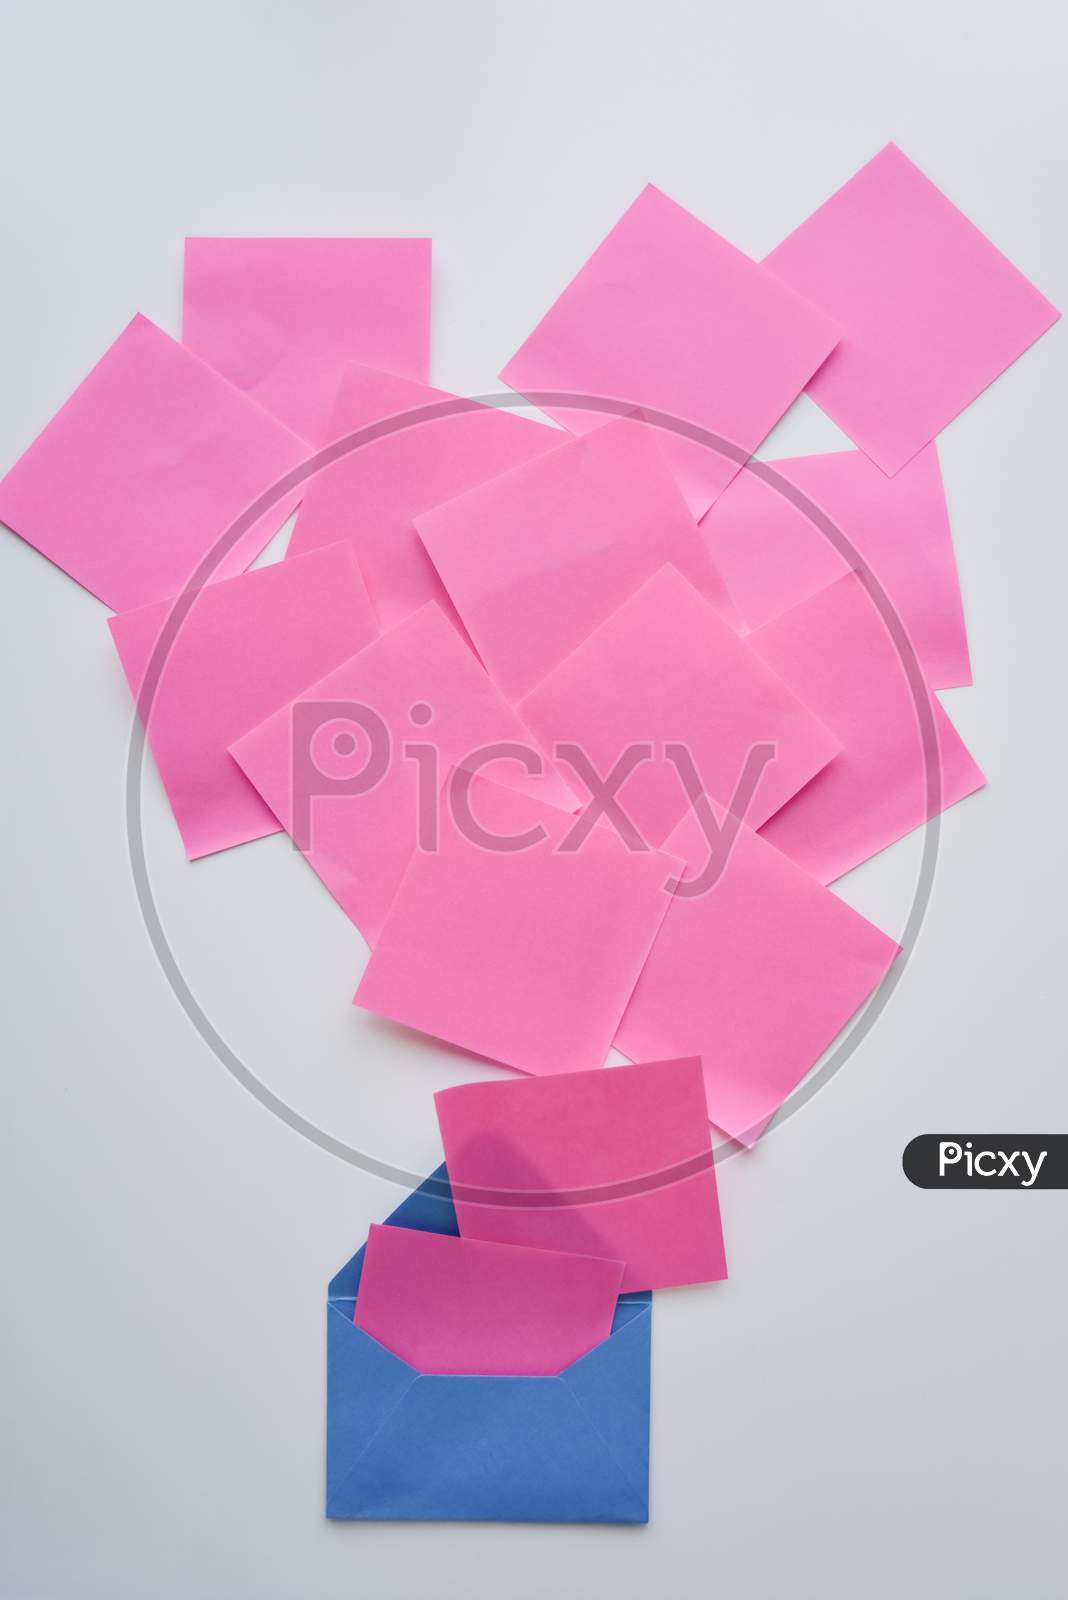 Selective Focus, Pink Paper Stickers In Chaos And Blue Envelope On The White Background